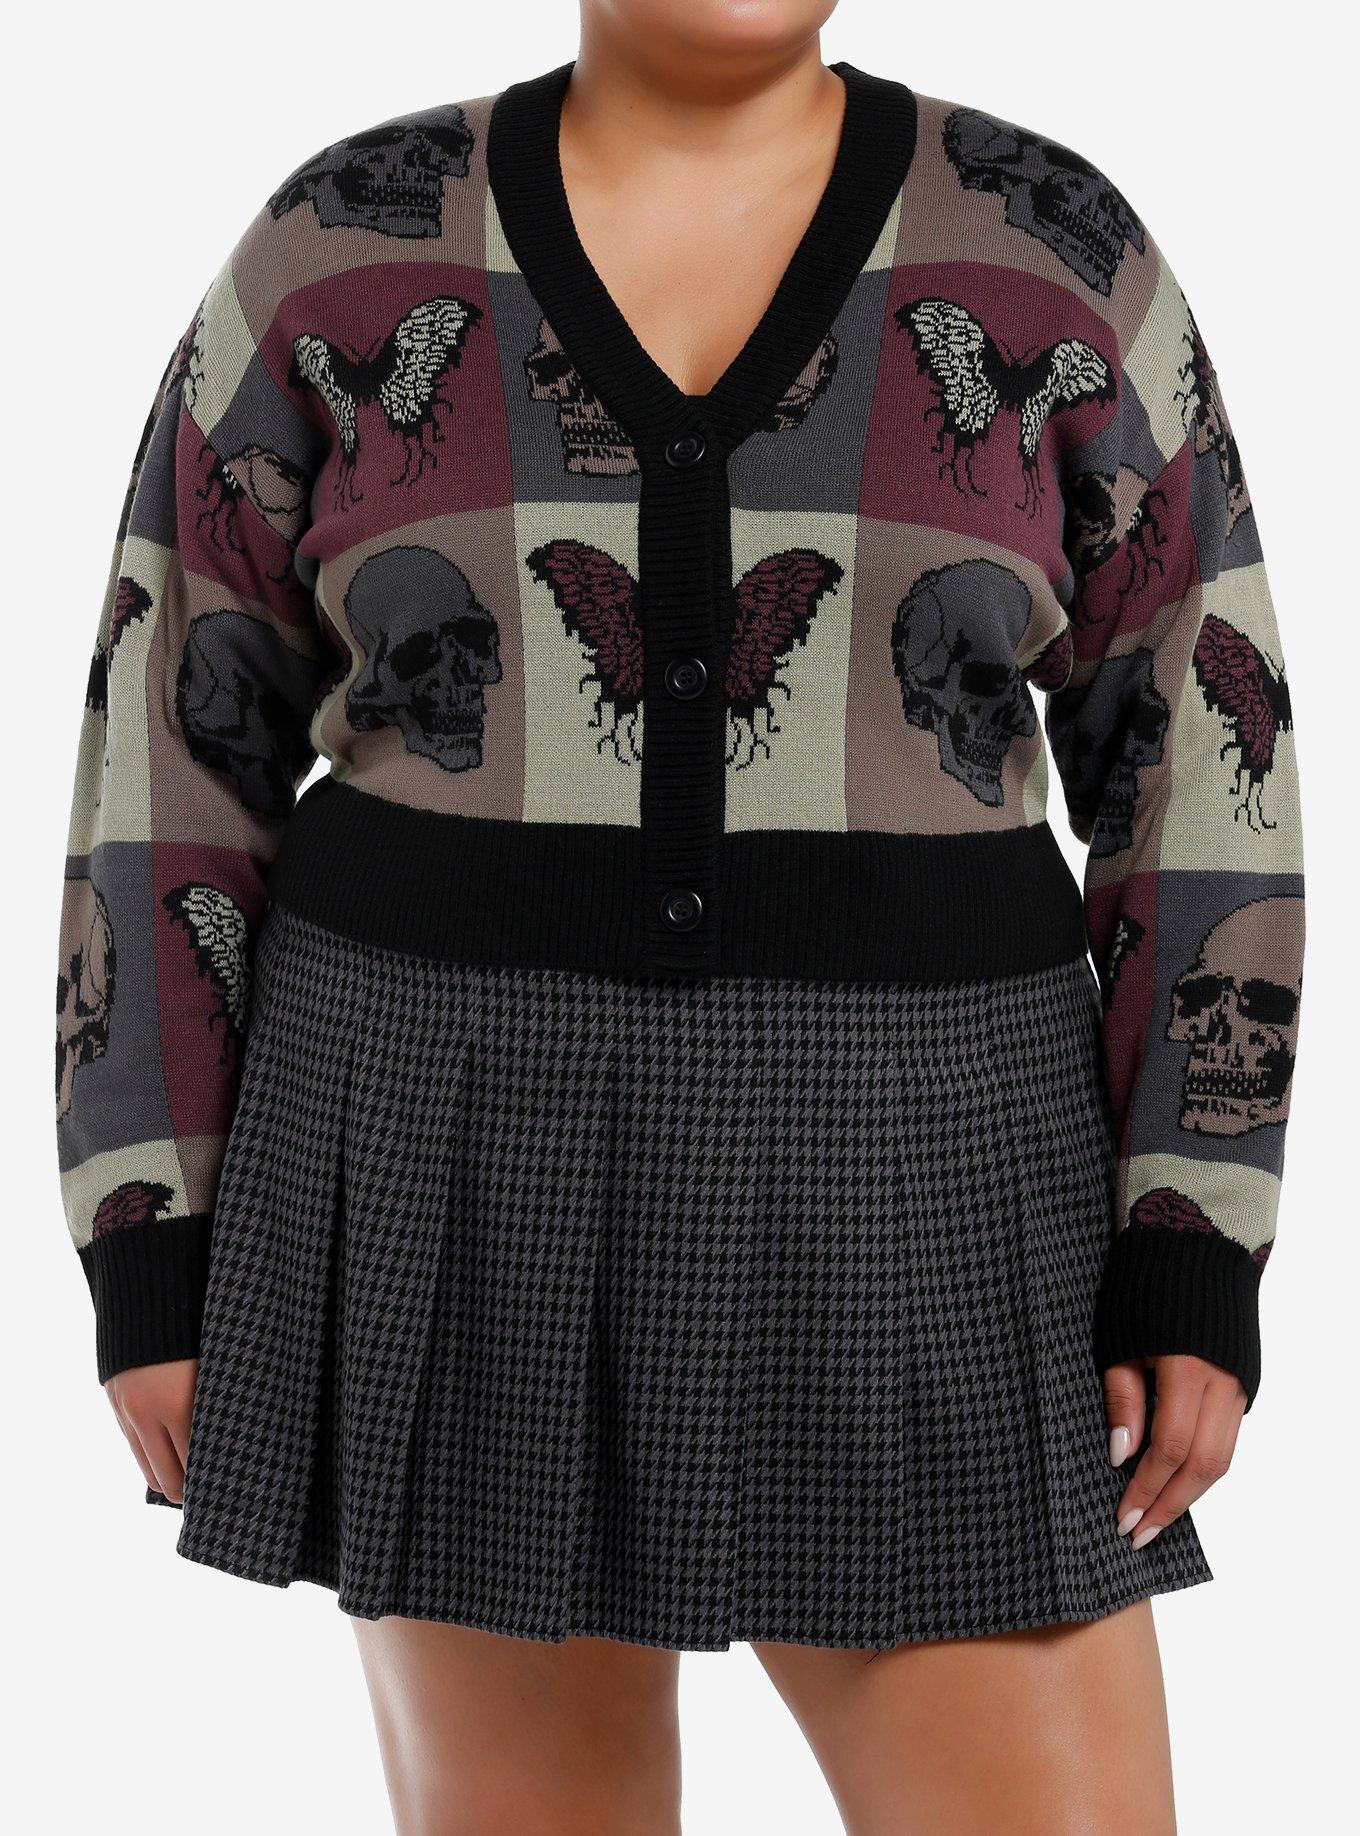 Social Collision Skull Butterfly Color-Block Girls Crop Cardigan Plus Size, BLUE, hi-res